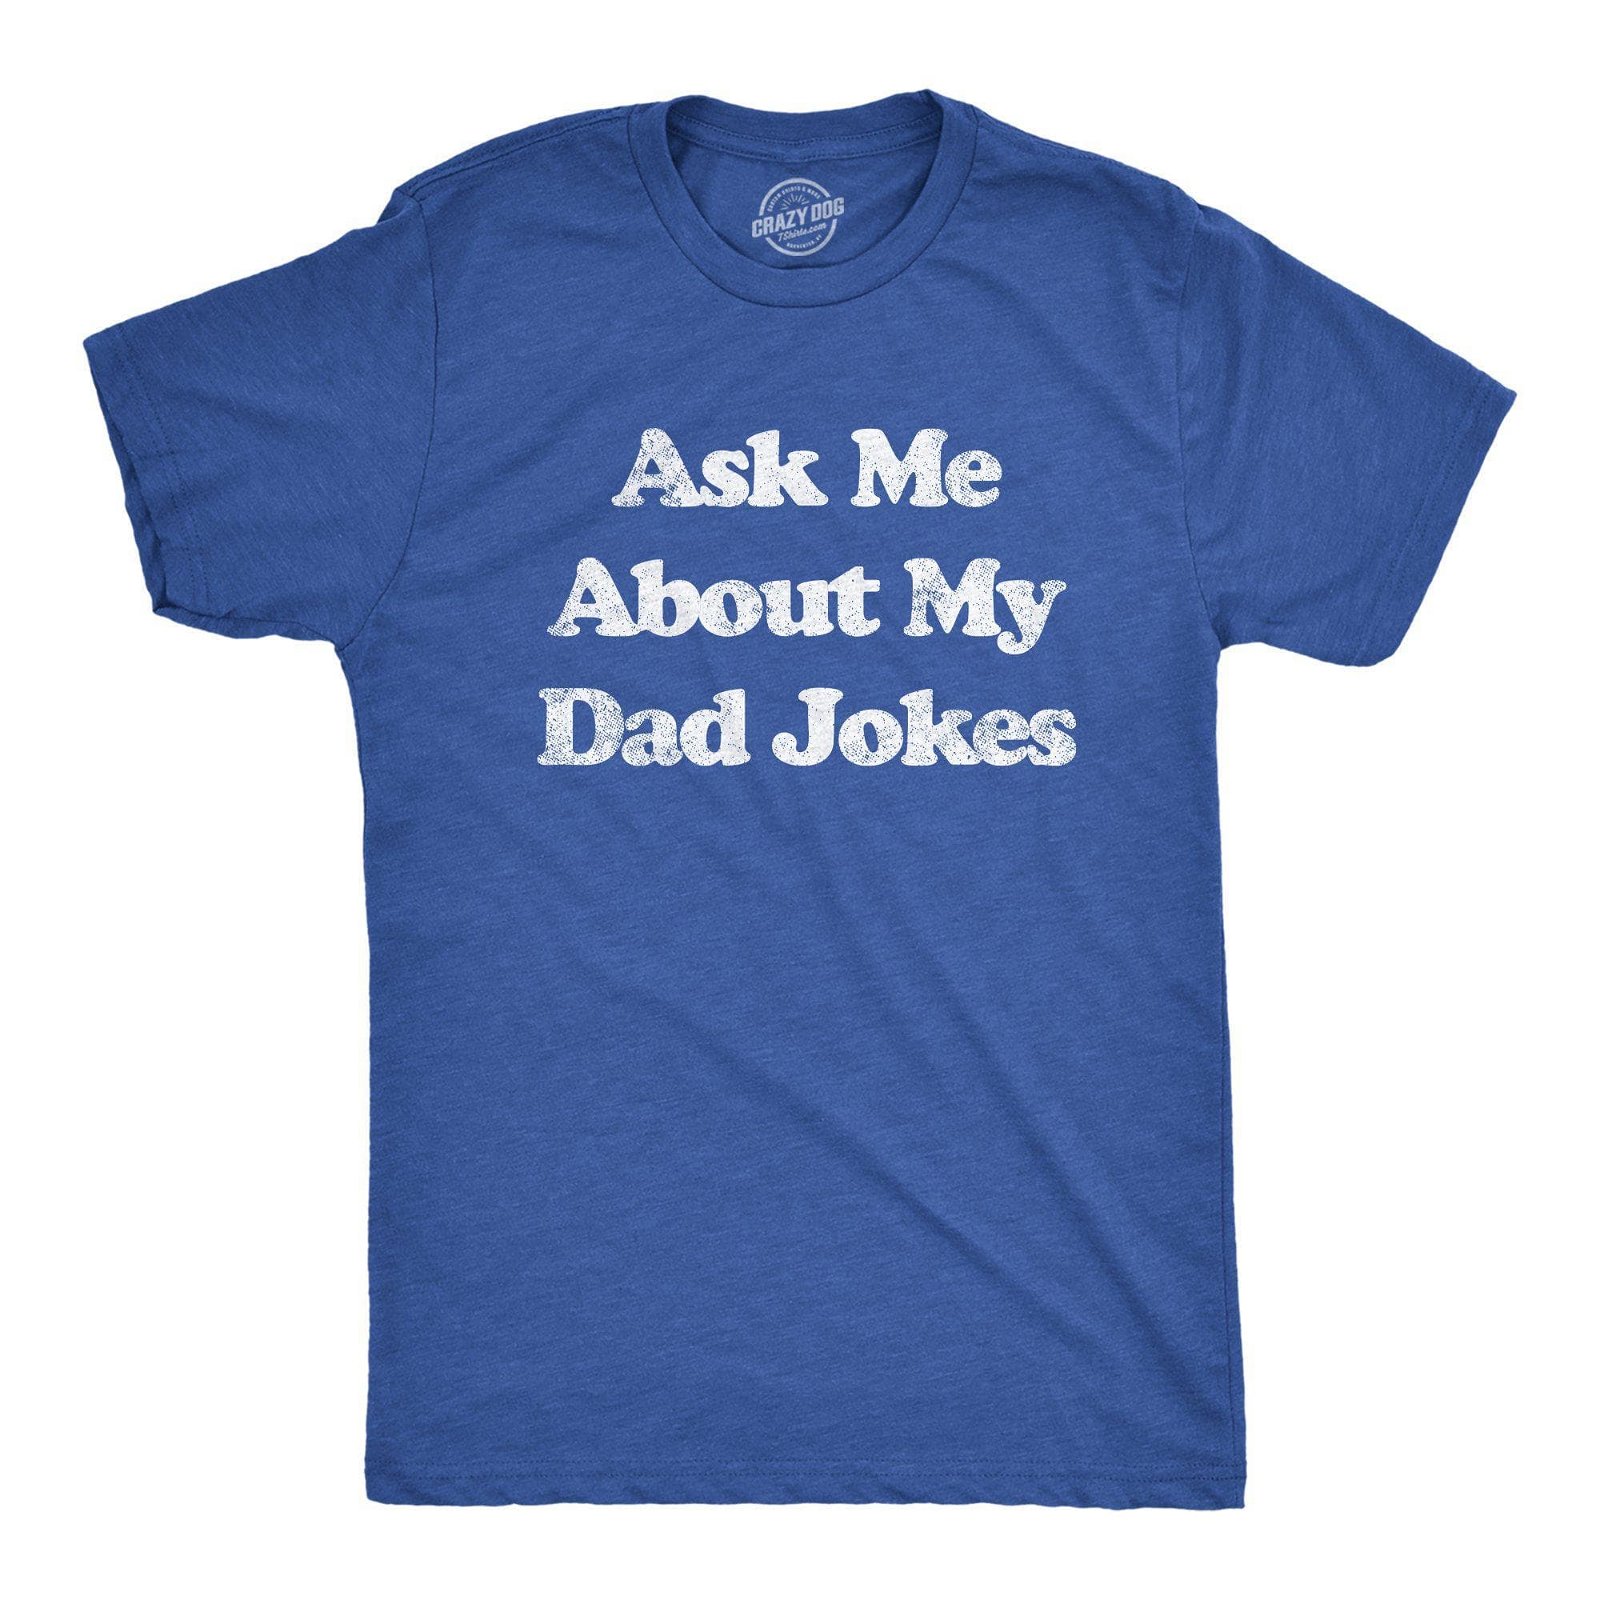 Image of Ask Me About My Dad Jokes Men's Tshirt